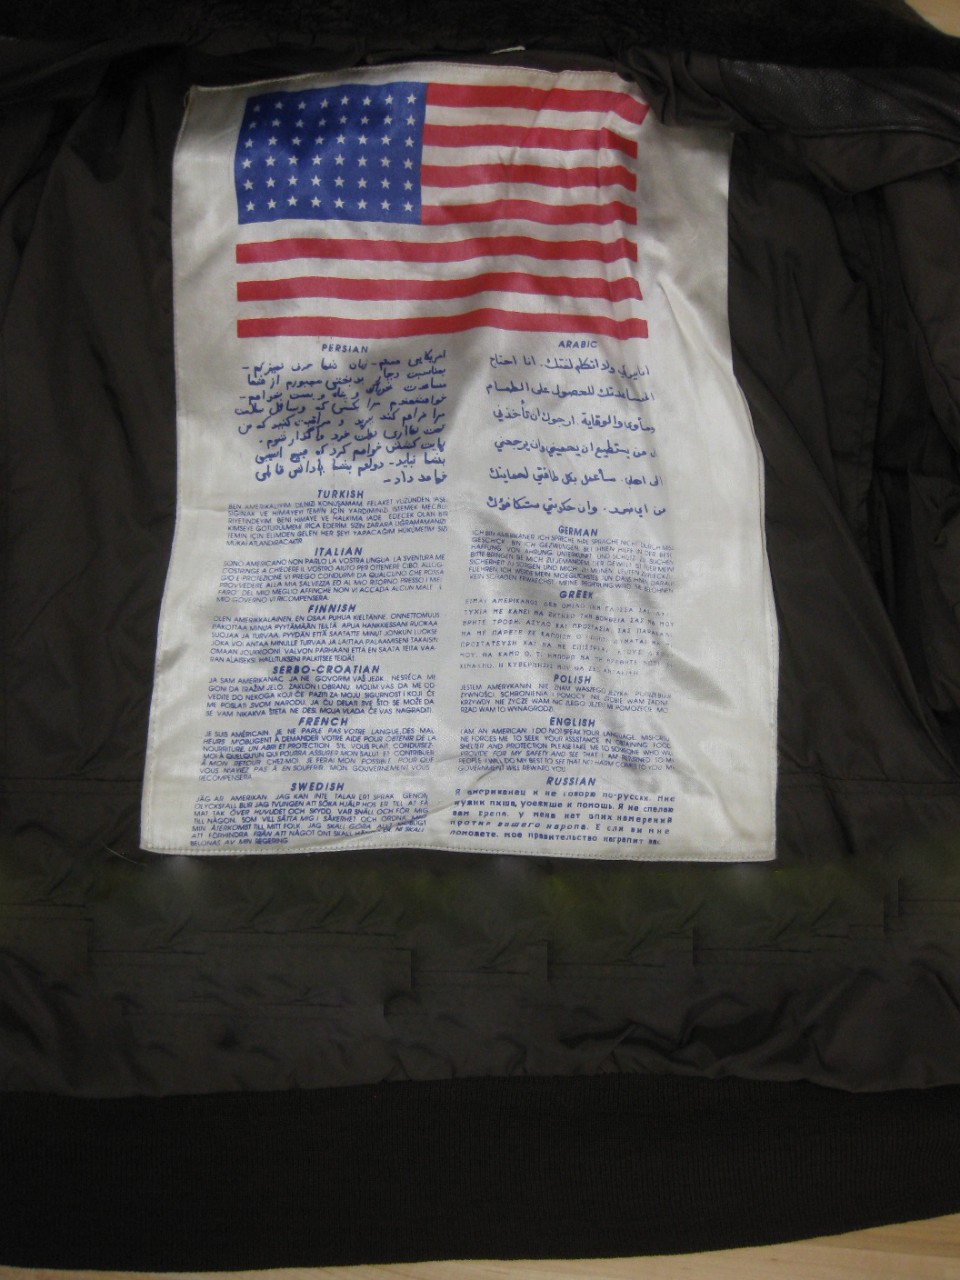 detail image of blood chit with us flag and a statement of safety in multiple languages